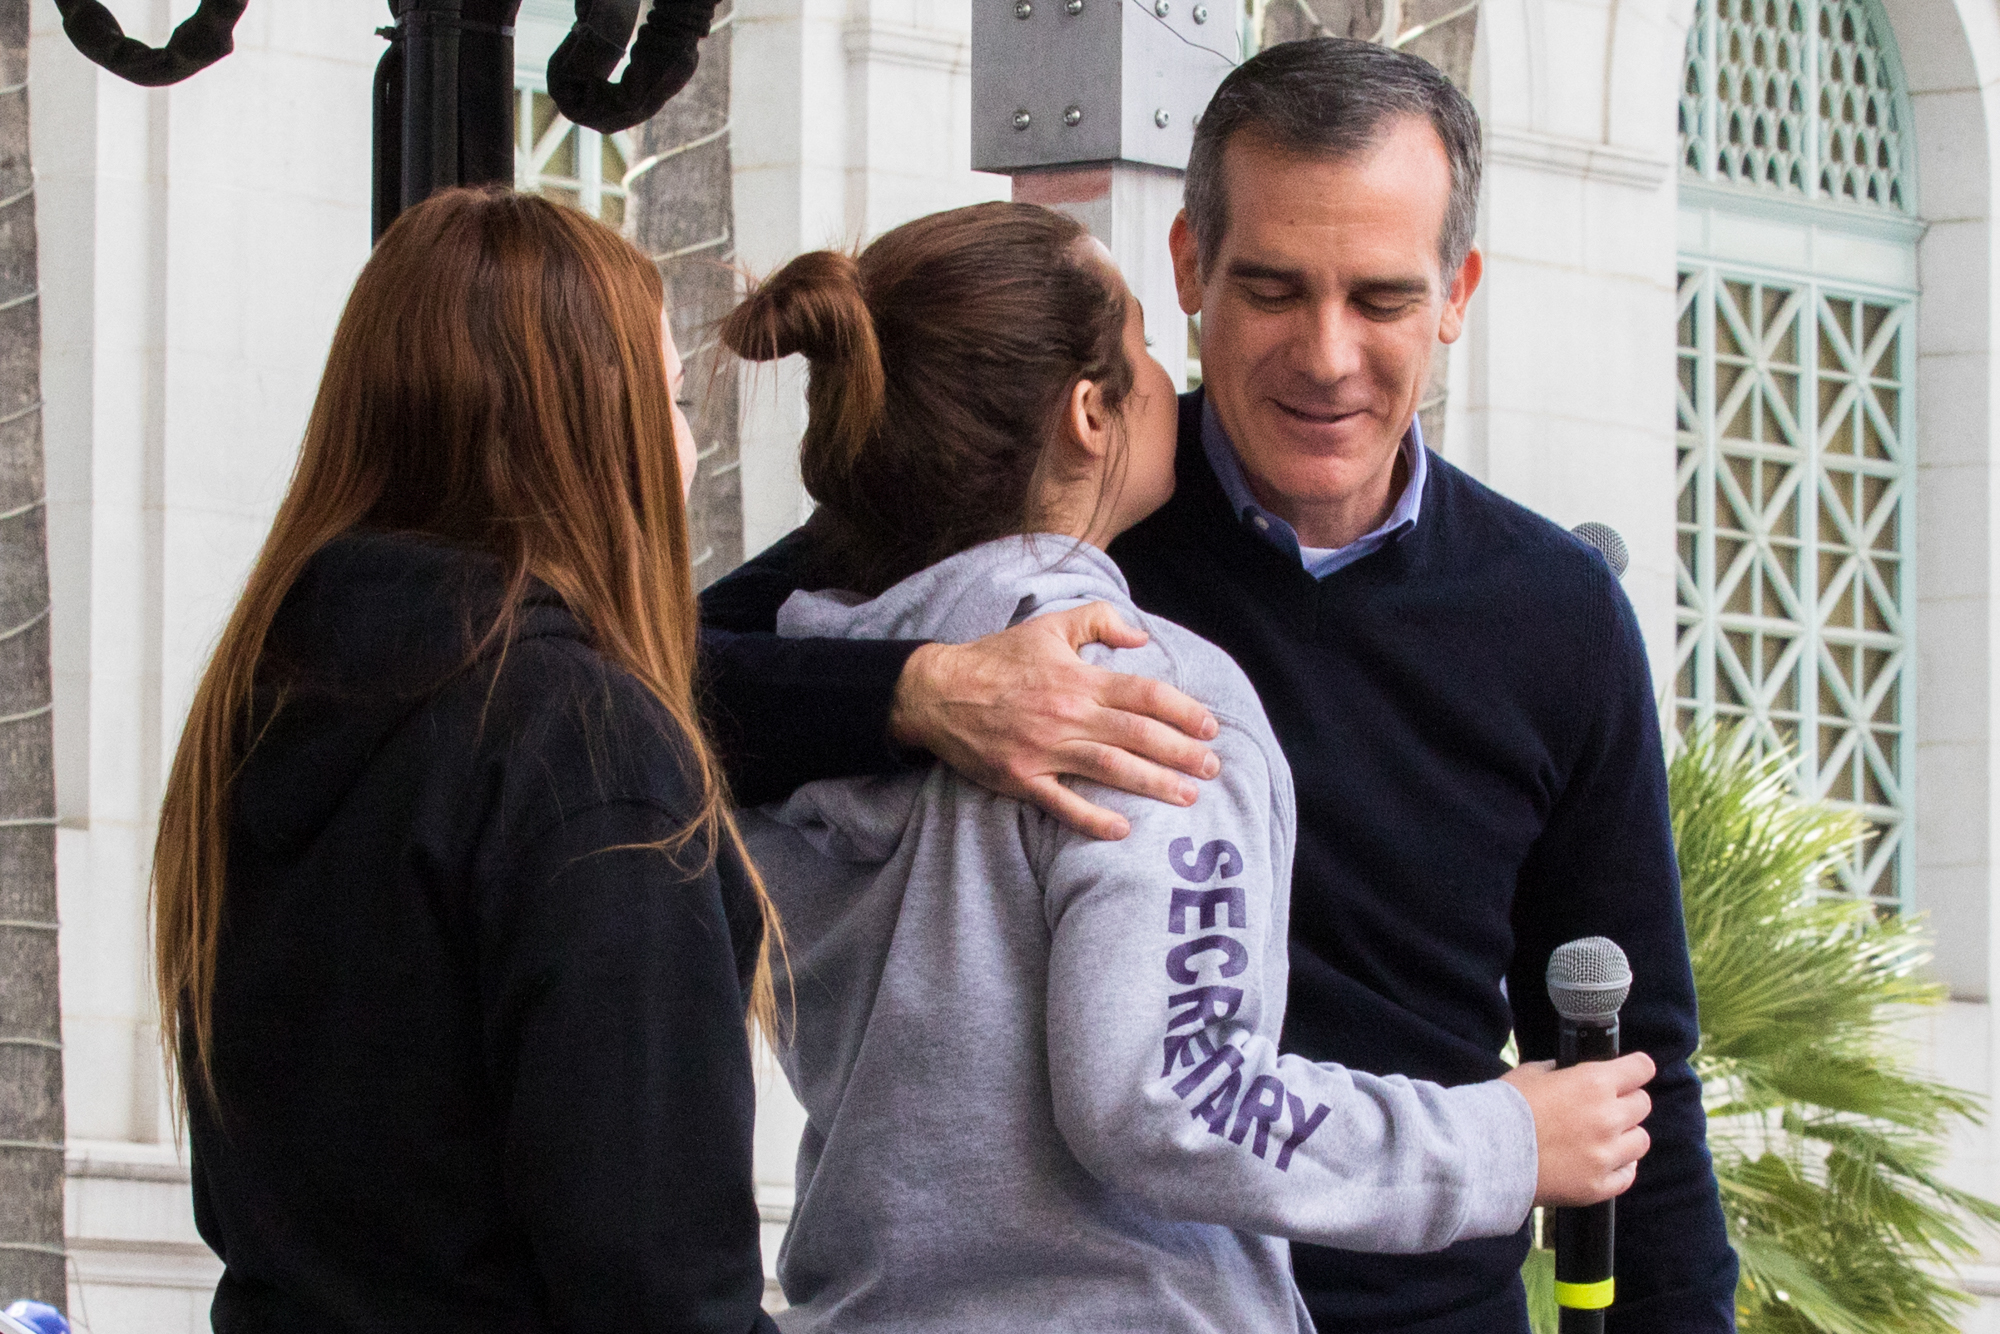  Los Angeles Mayor Eric Garcetti embraces 2 of the student speakers at the March For Our Lives protest on March 24, 2018 in Los Angeles, California. (Zane Meyer-Thornton/Corsair Photo) 